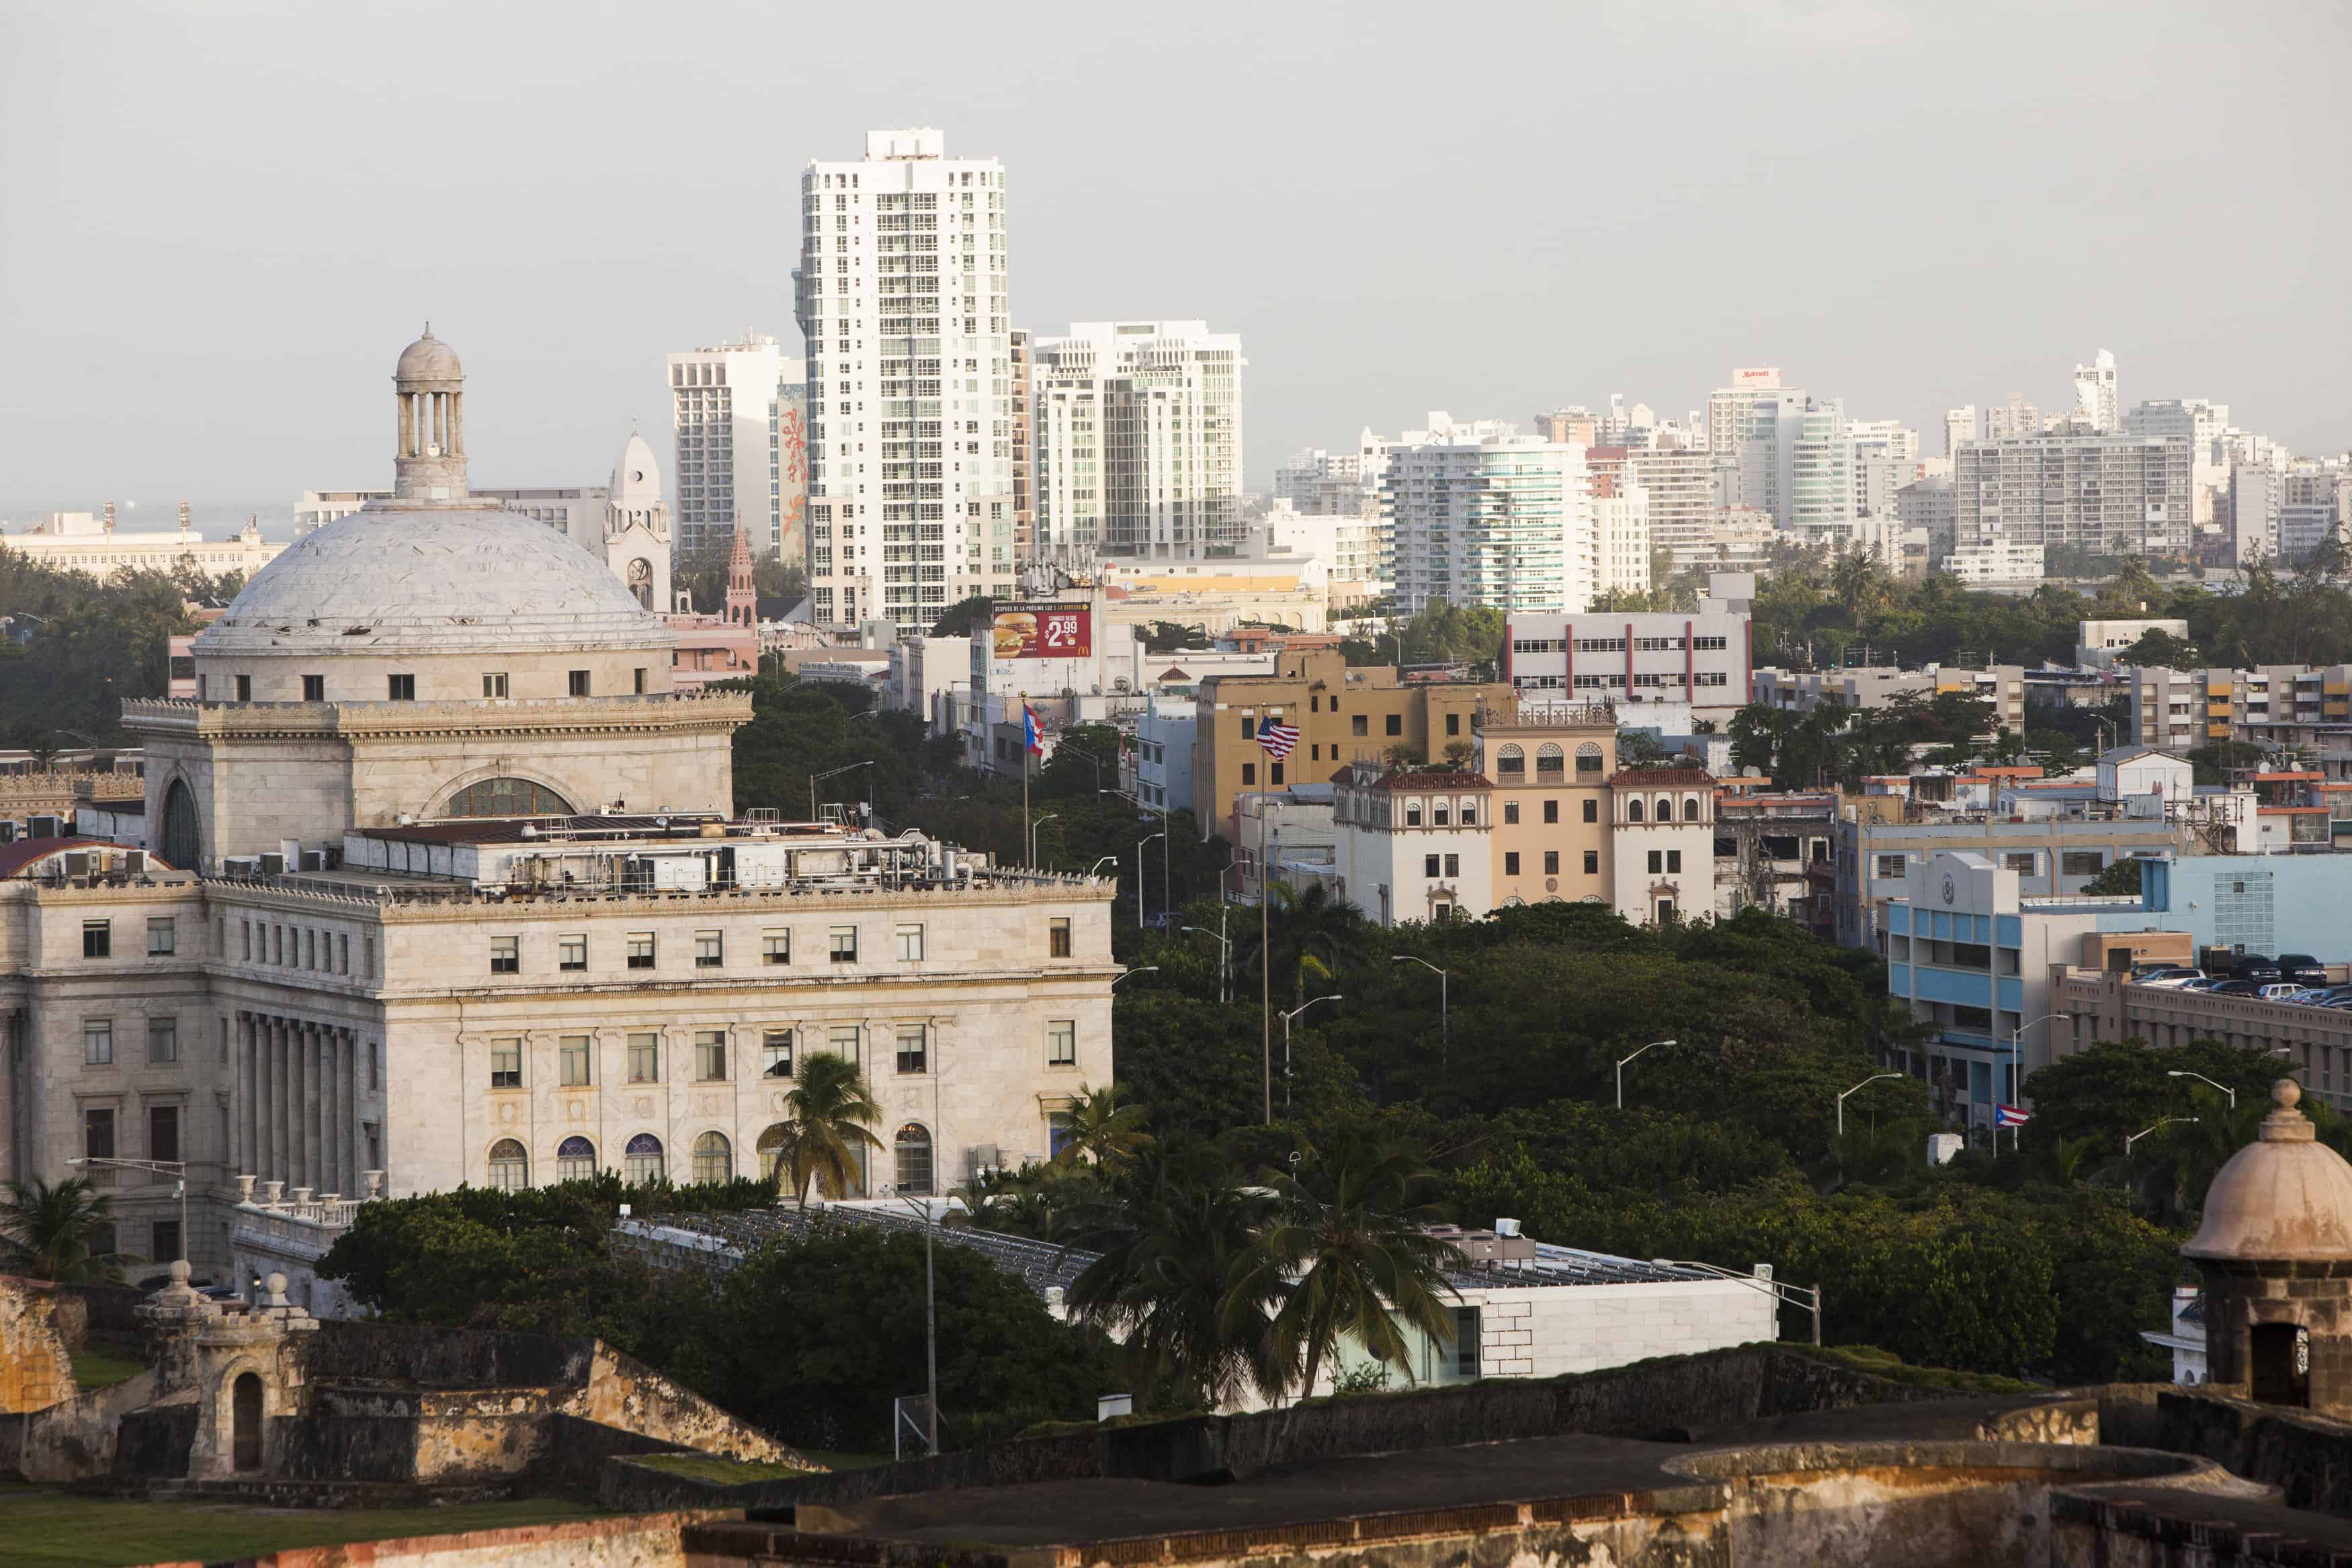 Old San Juan, the center for Puerto Rican tourism.